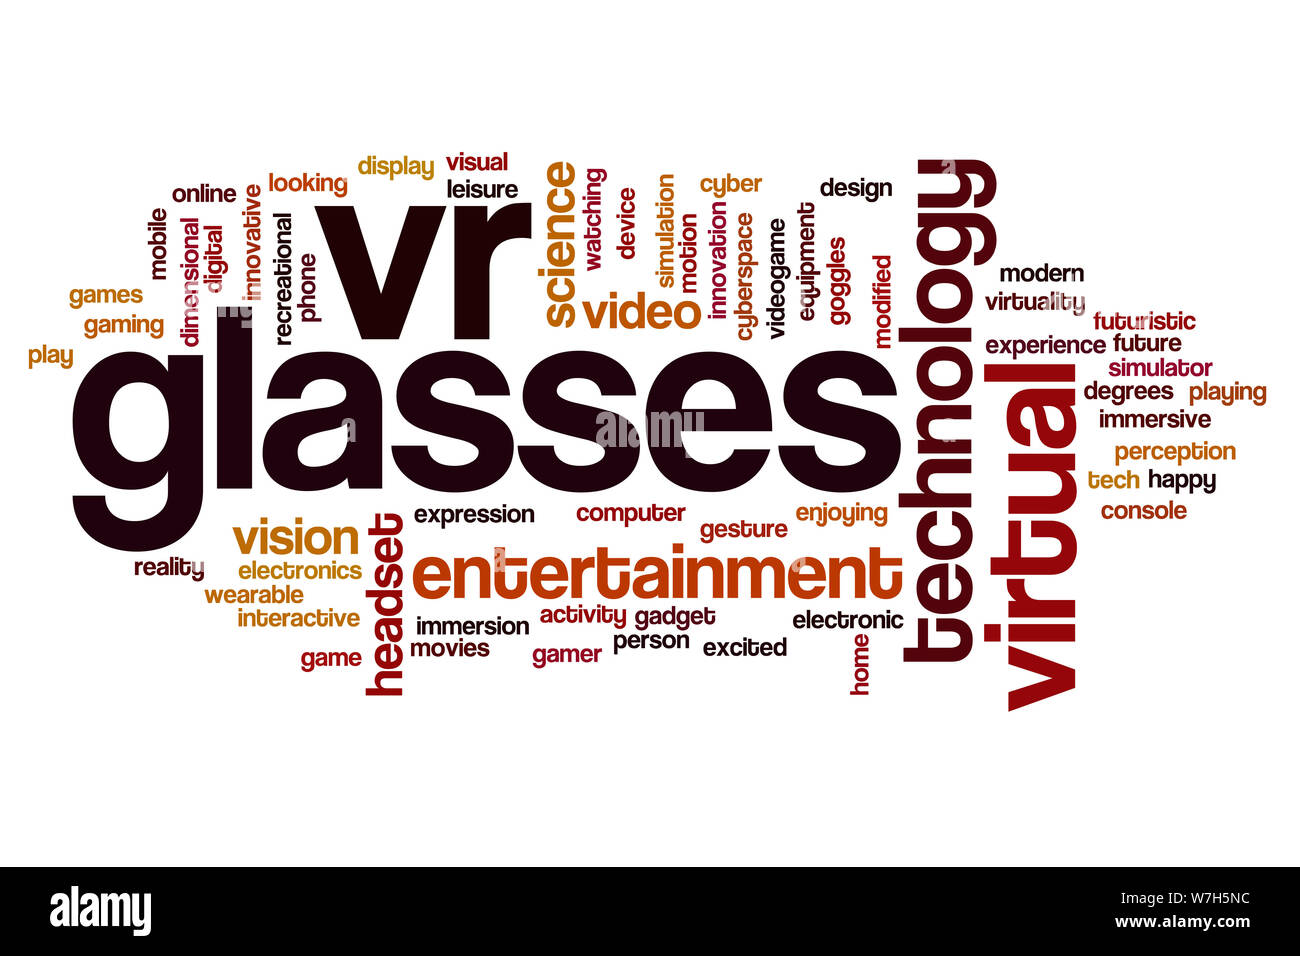 VR glasses word cloud concept Stock Photo